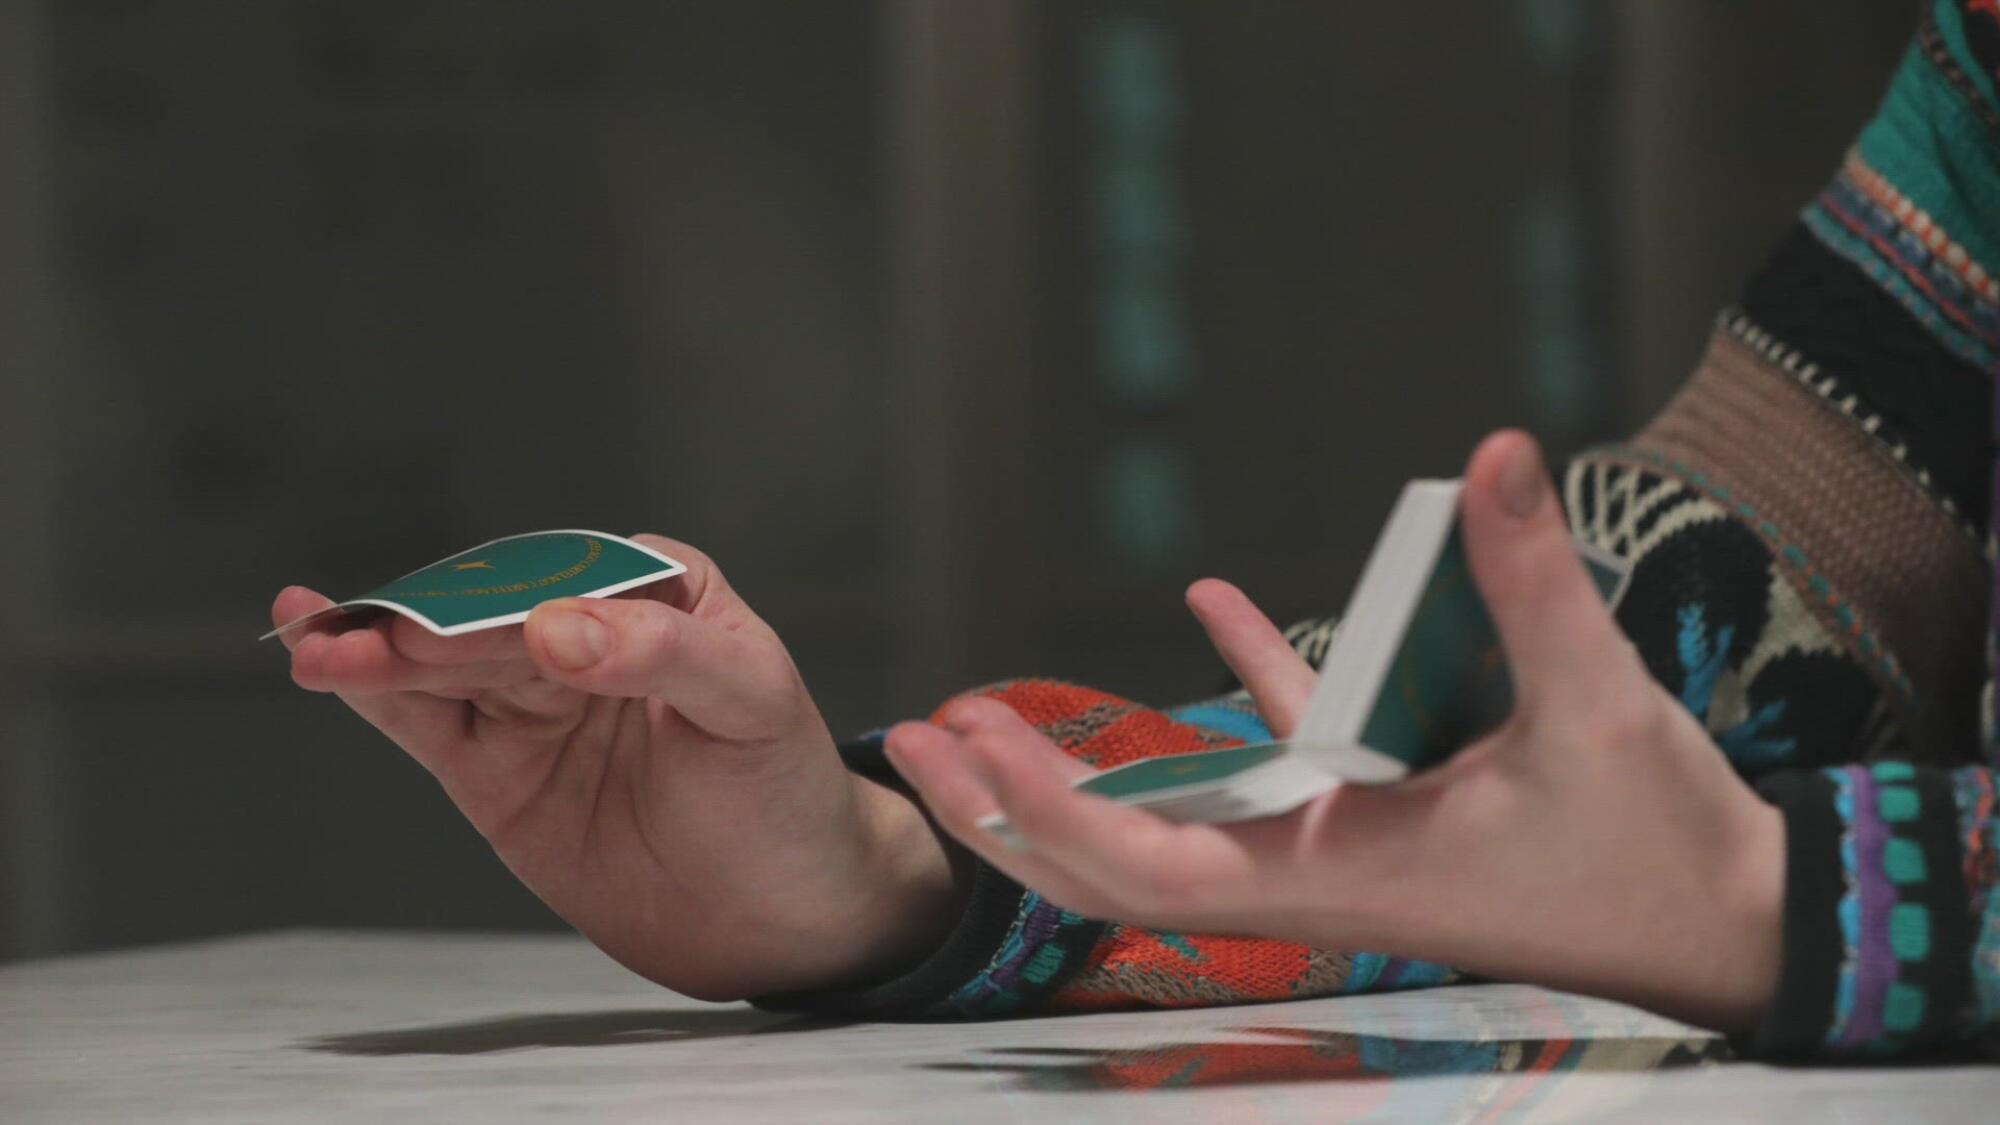 Hands Too Small for Sleight of Hand Card Tricks?